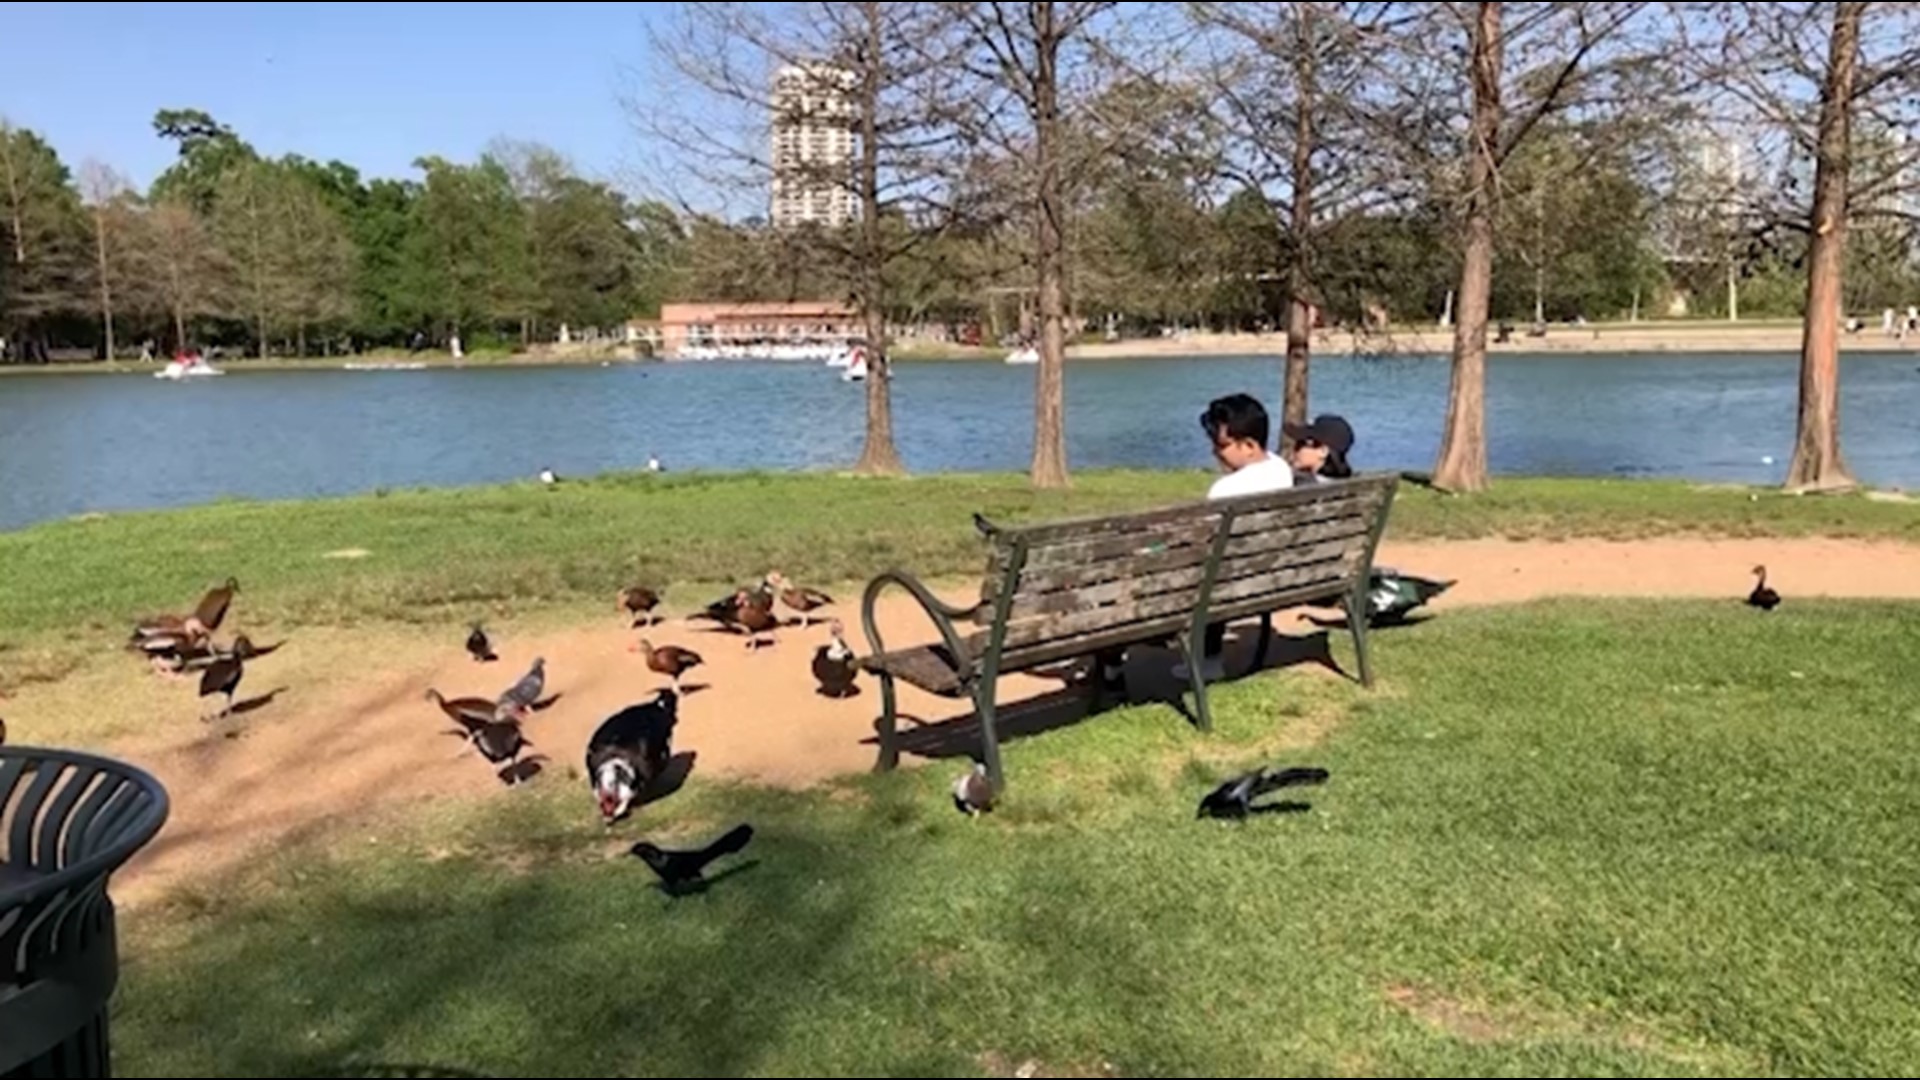 Workers say the duck population has exploded creating an unsanitary situation.